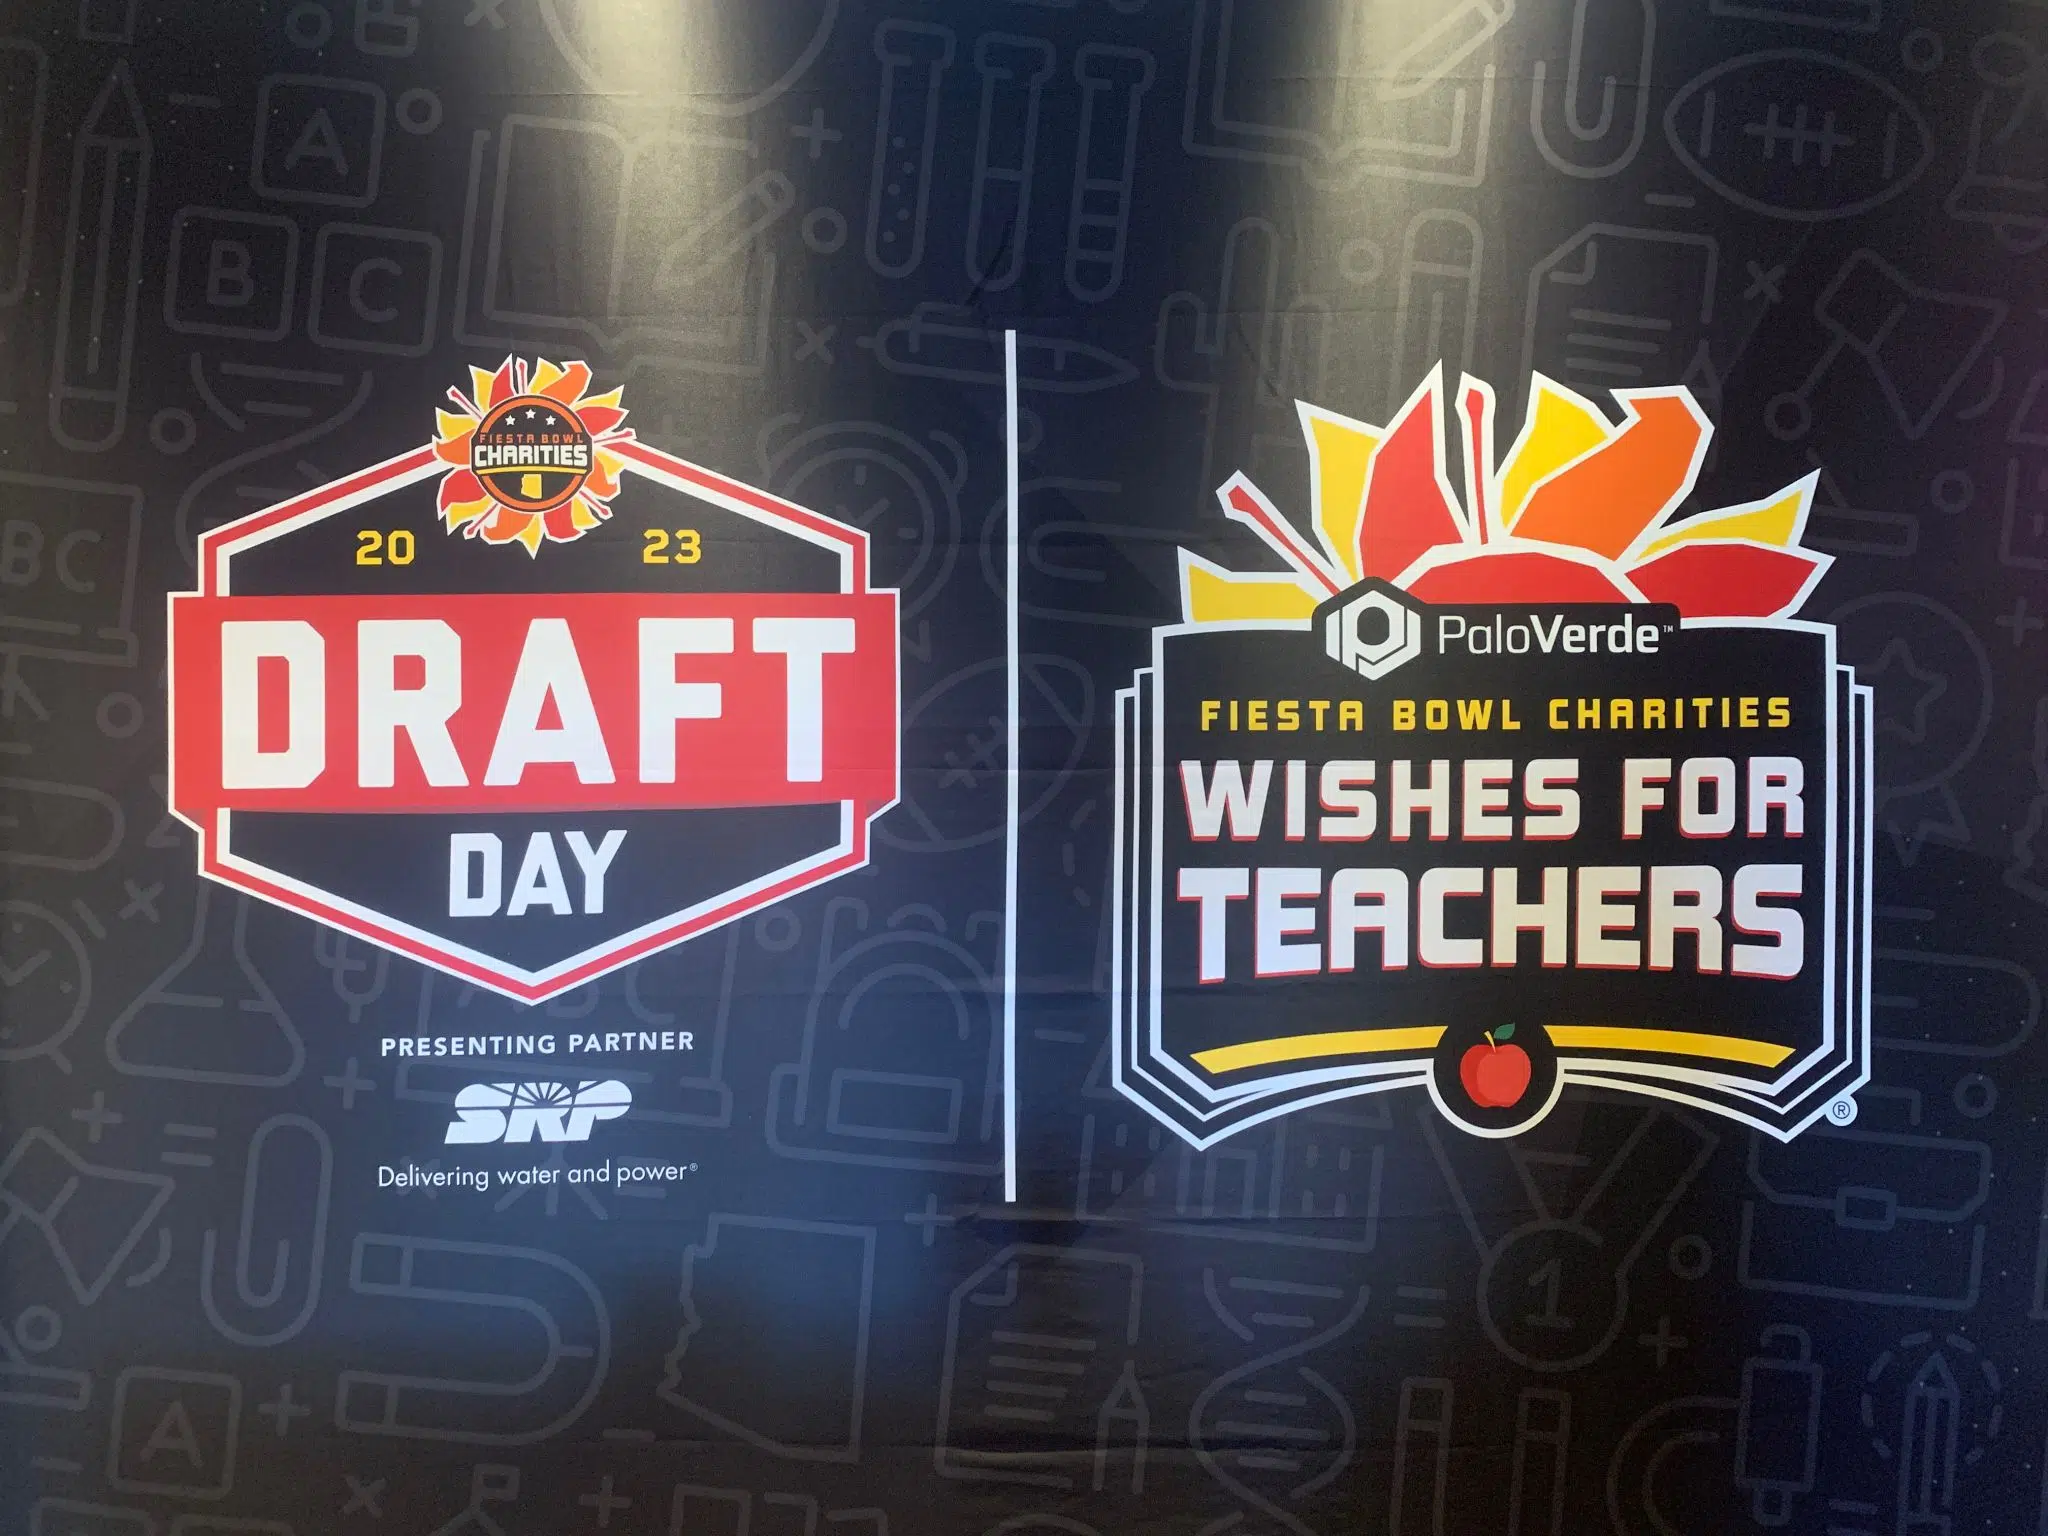 Fiesta Bowl Wishes for Teachers Charity